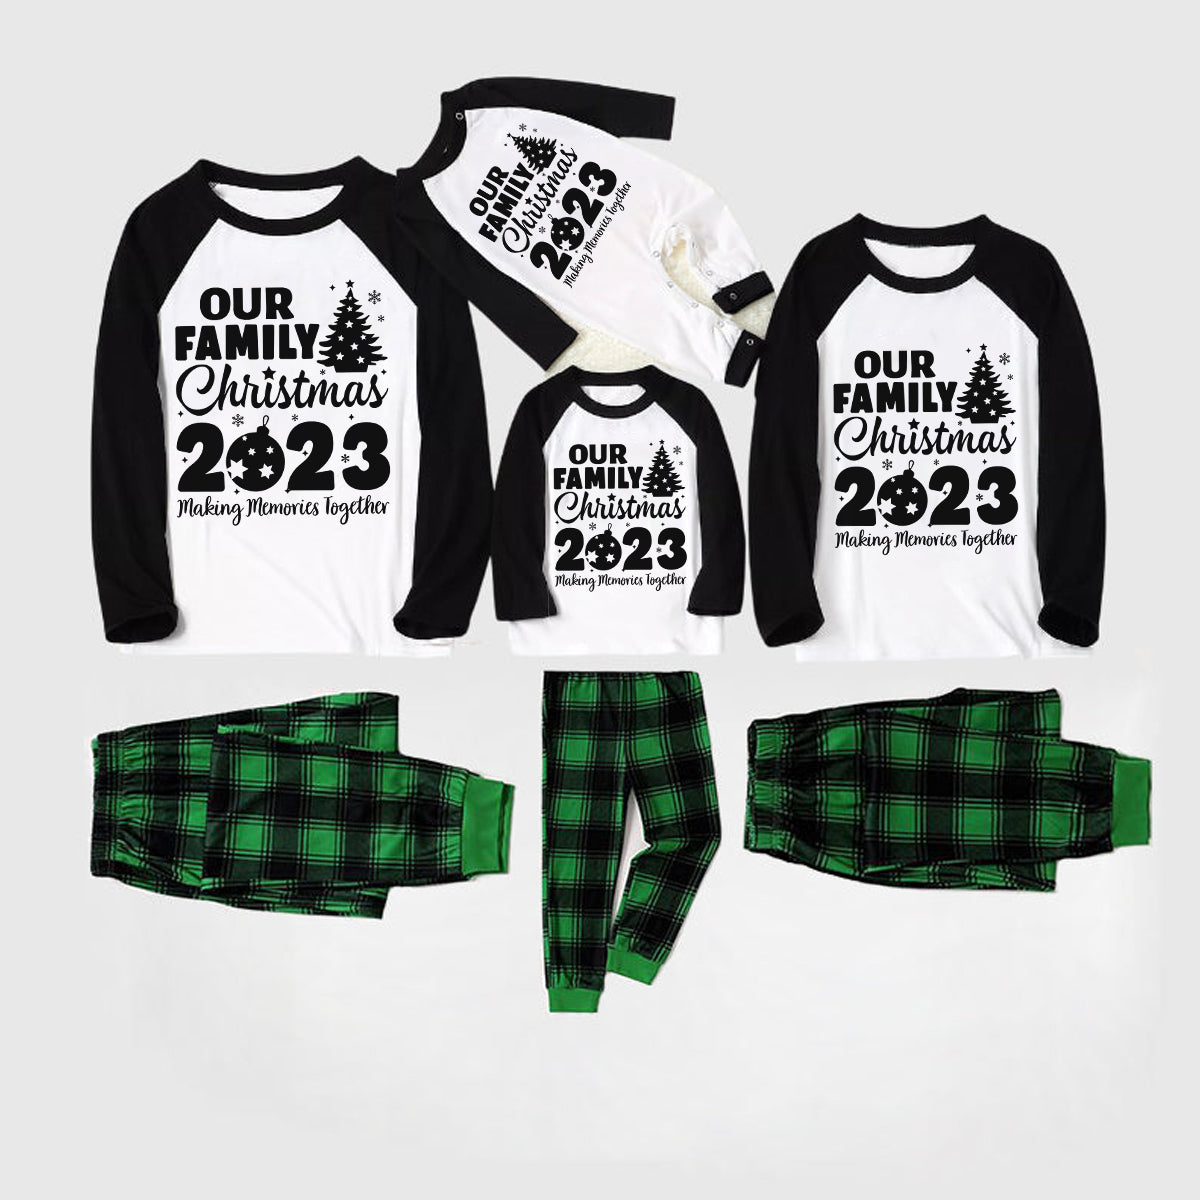 Christmas Tree & "Making Memories Together" Patterned Black Sleeve Contrast Tops and and Black and Gren Plaid Pants Family Matching Pajamas Sets With Dog Bandana